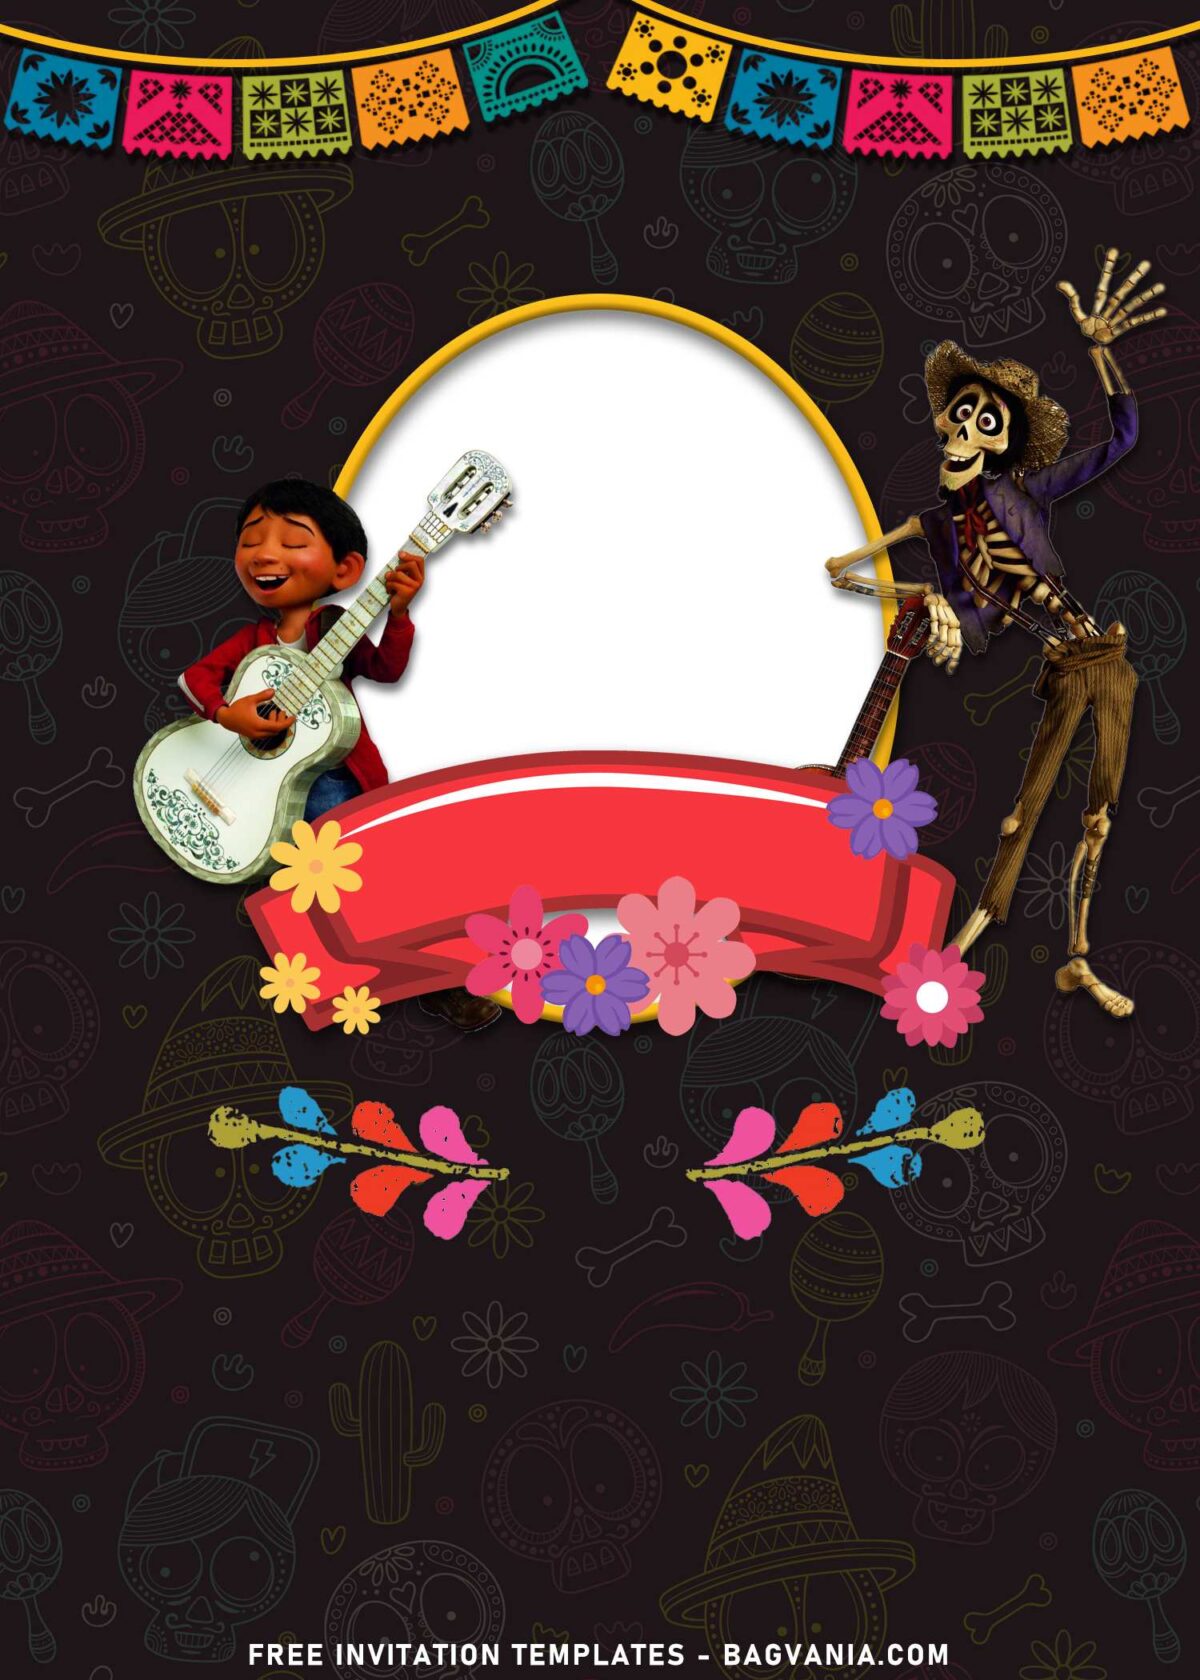 11+ Lively Mexican Fiesta Disney Coco Birthday Invitation Templates with Miguel is playing guitar